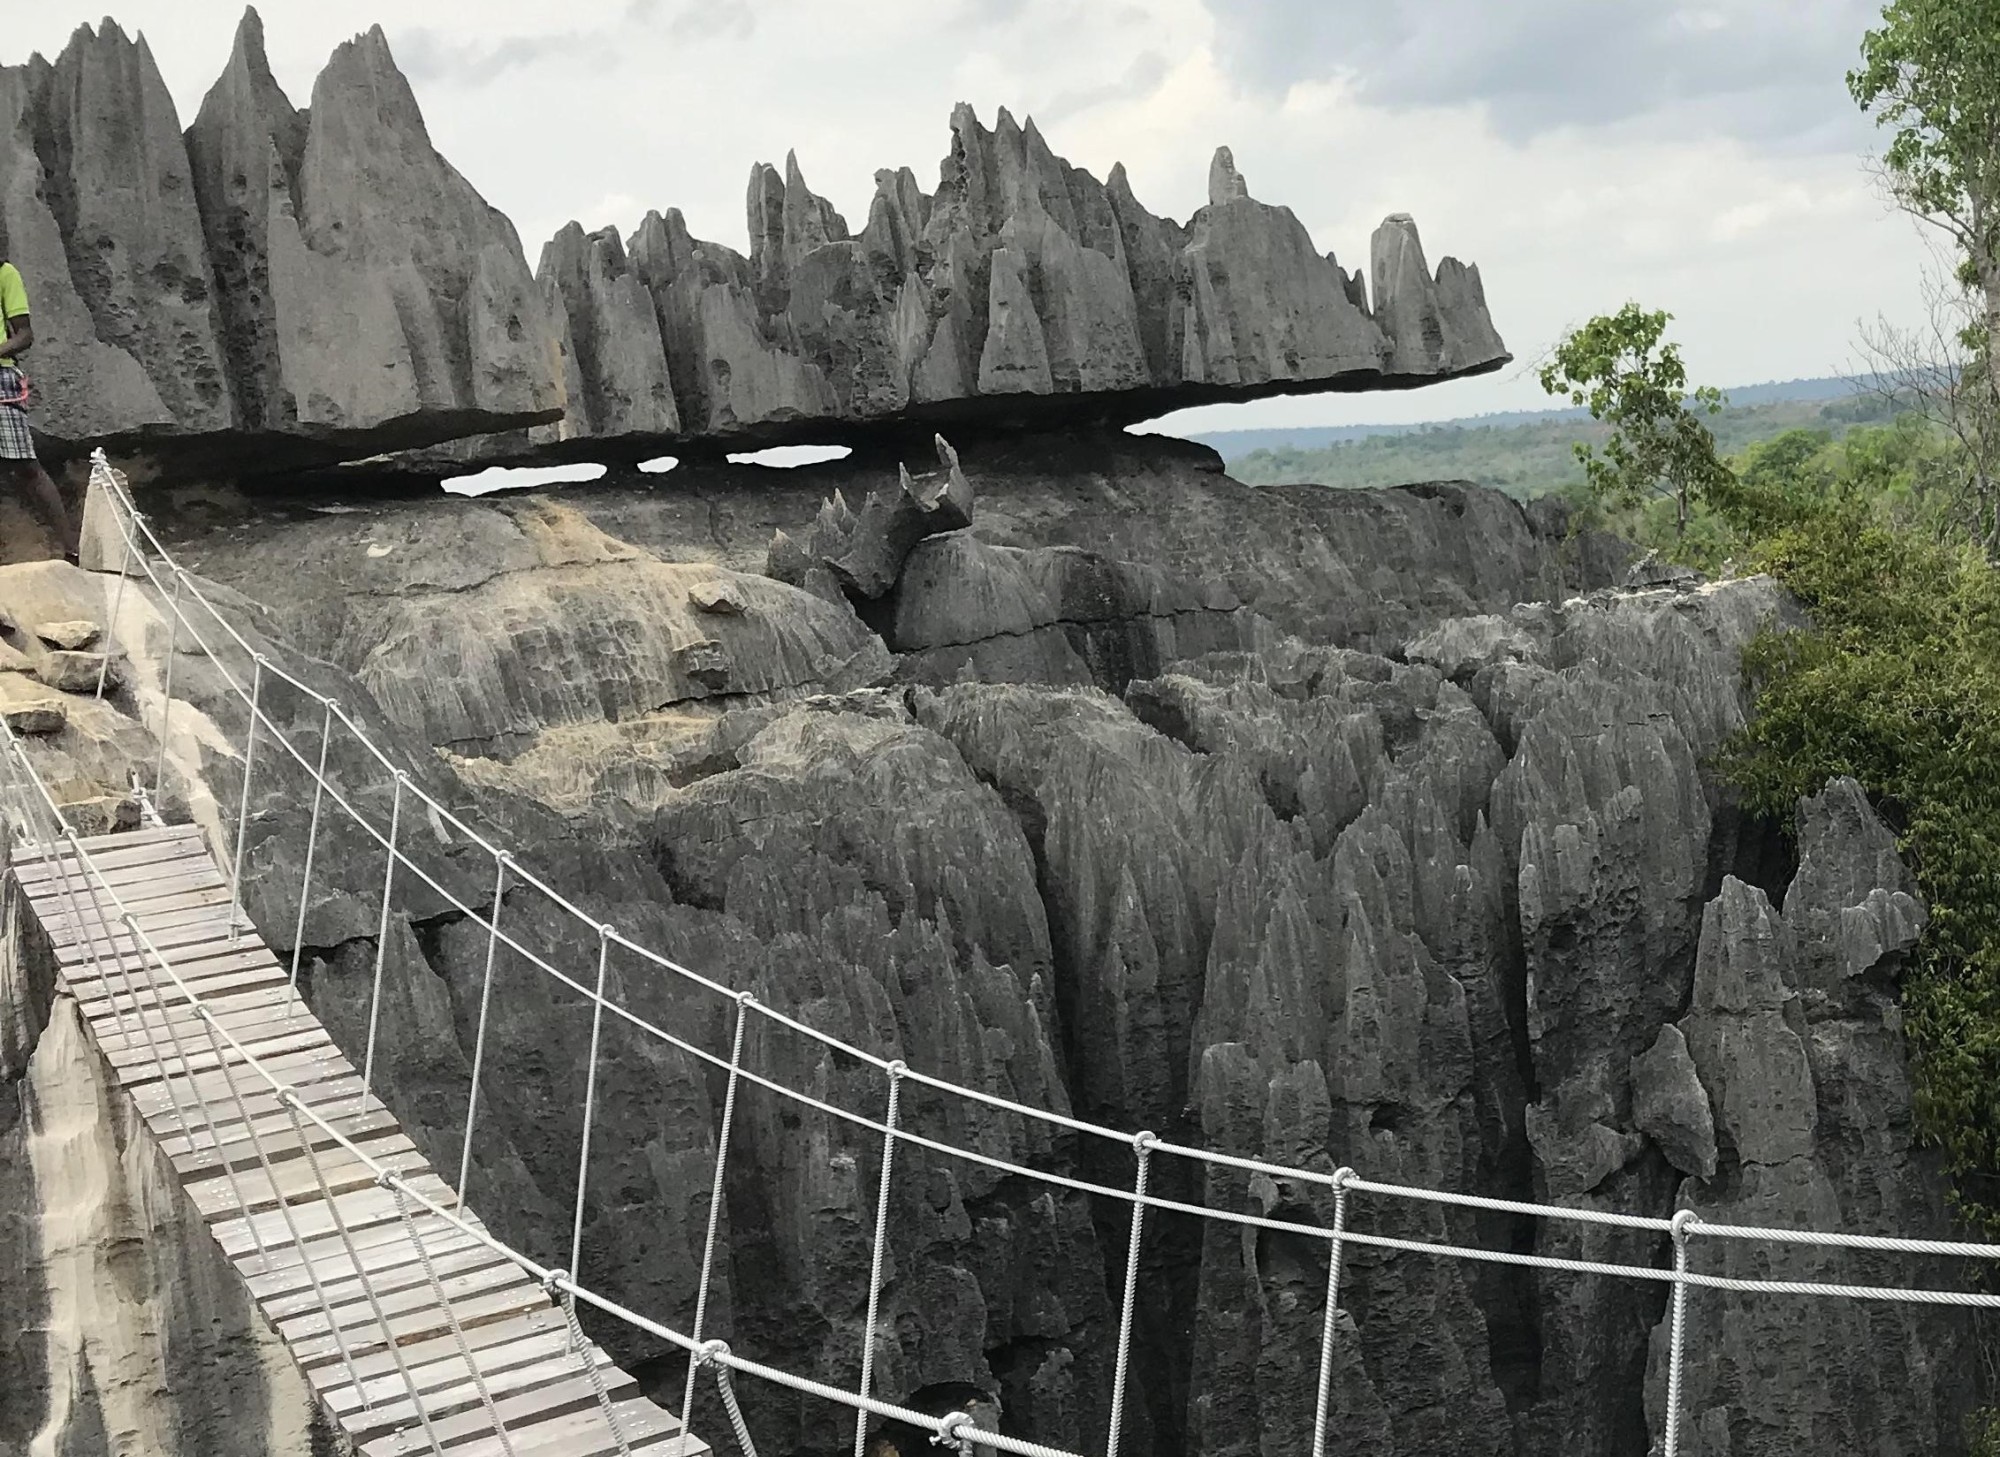 The Forest of Knives offers visitors a once-in-a-lifetime opportunity to witness some of the world's most unique geological formations and ecosystems.